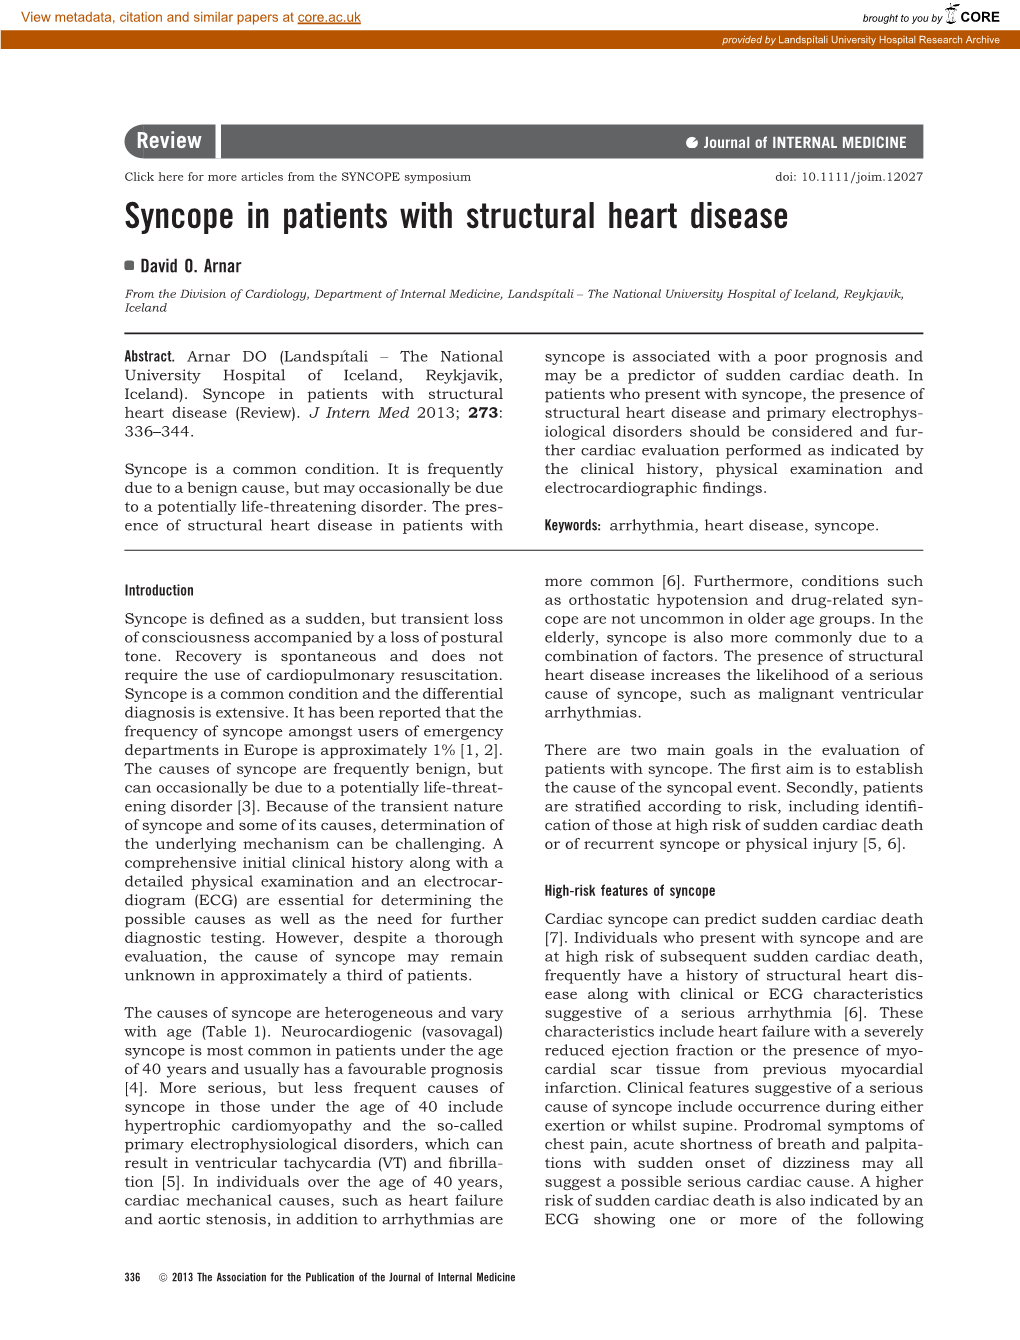 Syncope in Patients with Structural Heart Disease